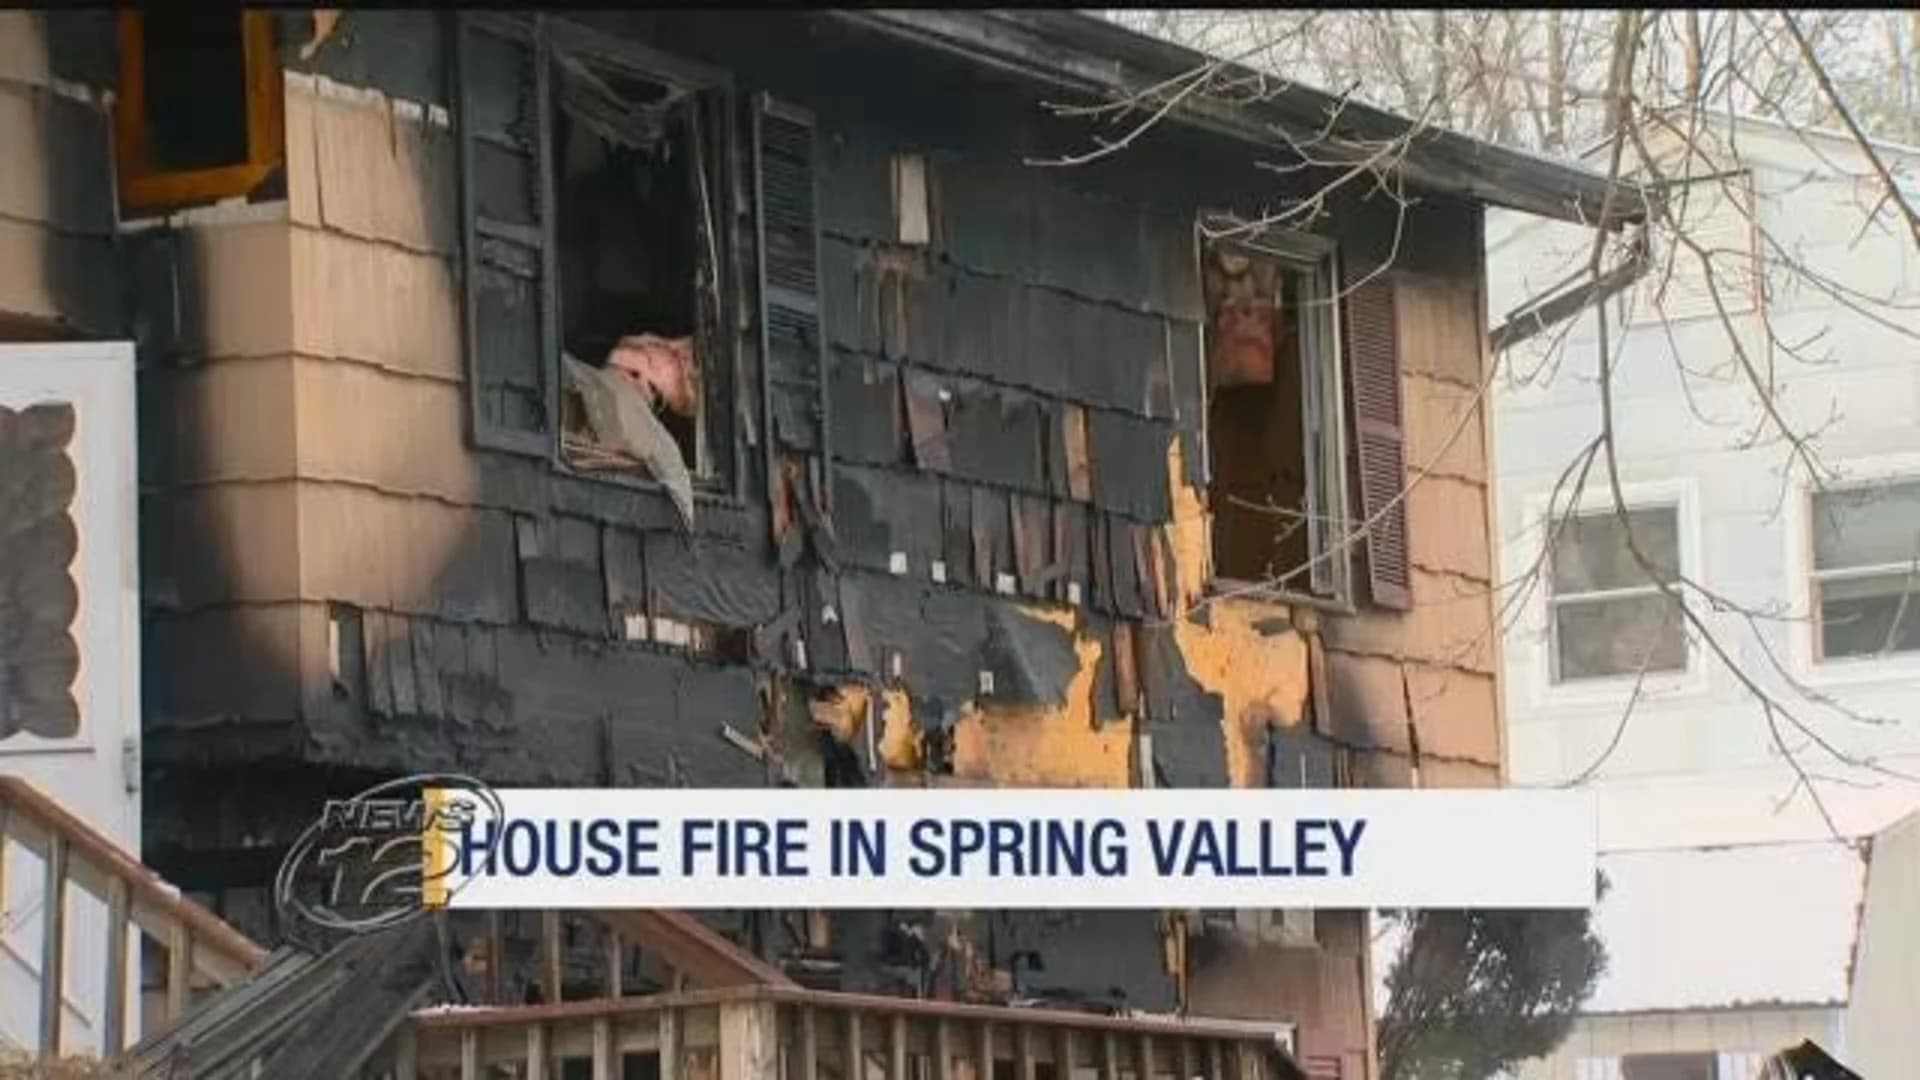 Fire and ice: Flames destroy Spring Valley home during snowstorm